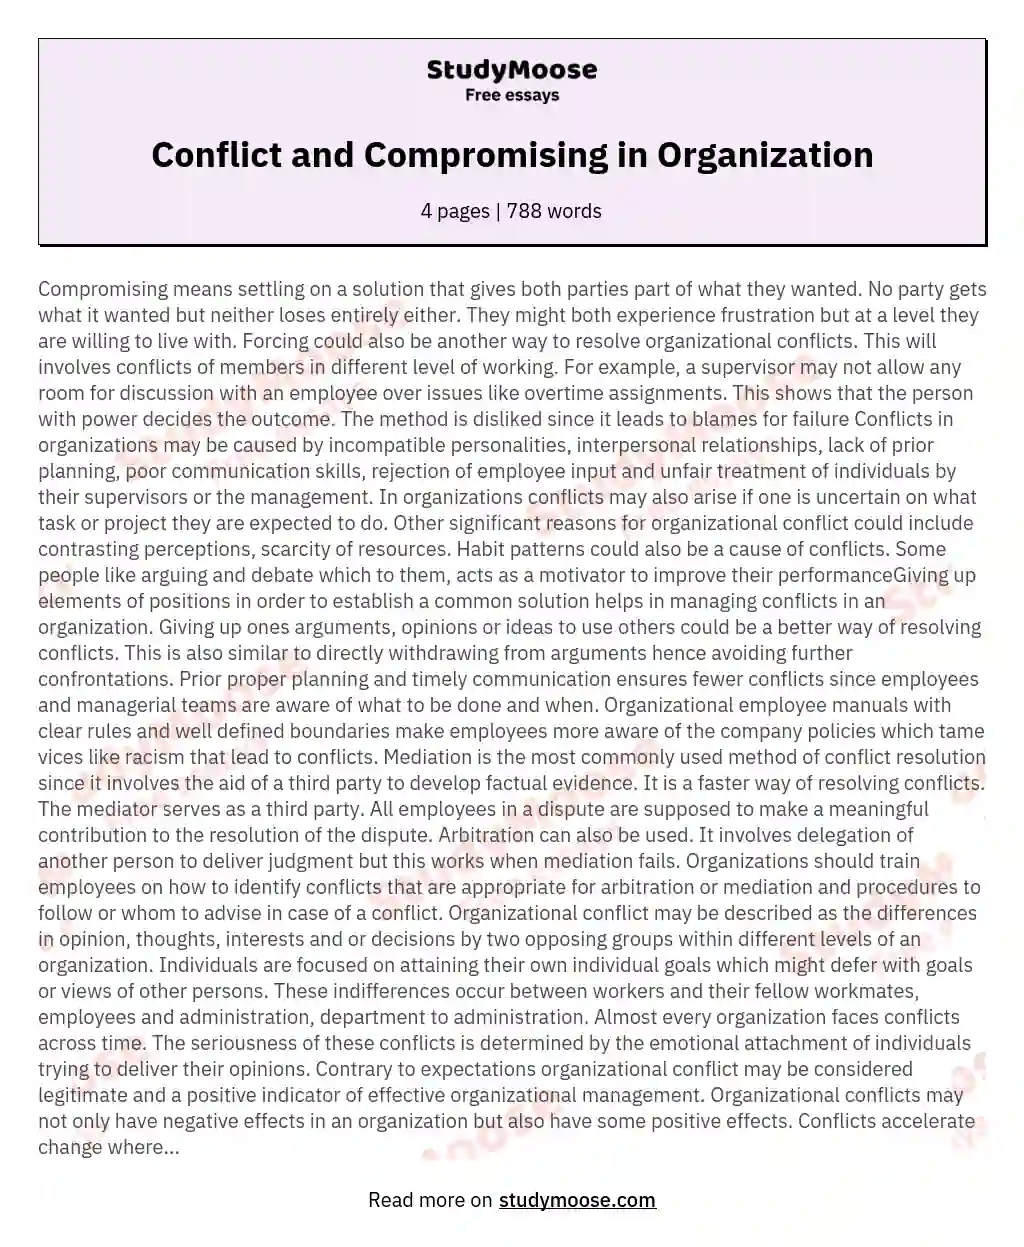 Conflict and Compromising in Organization essay